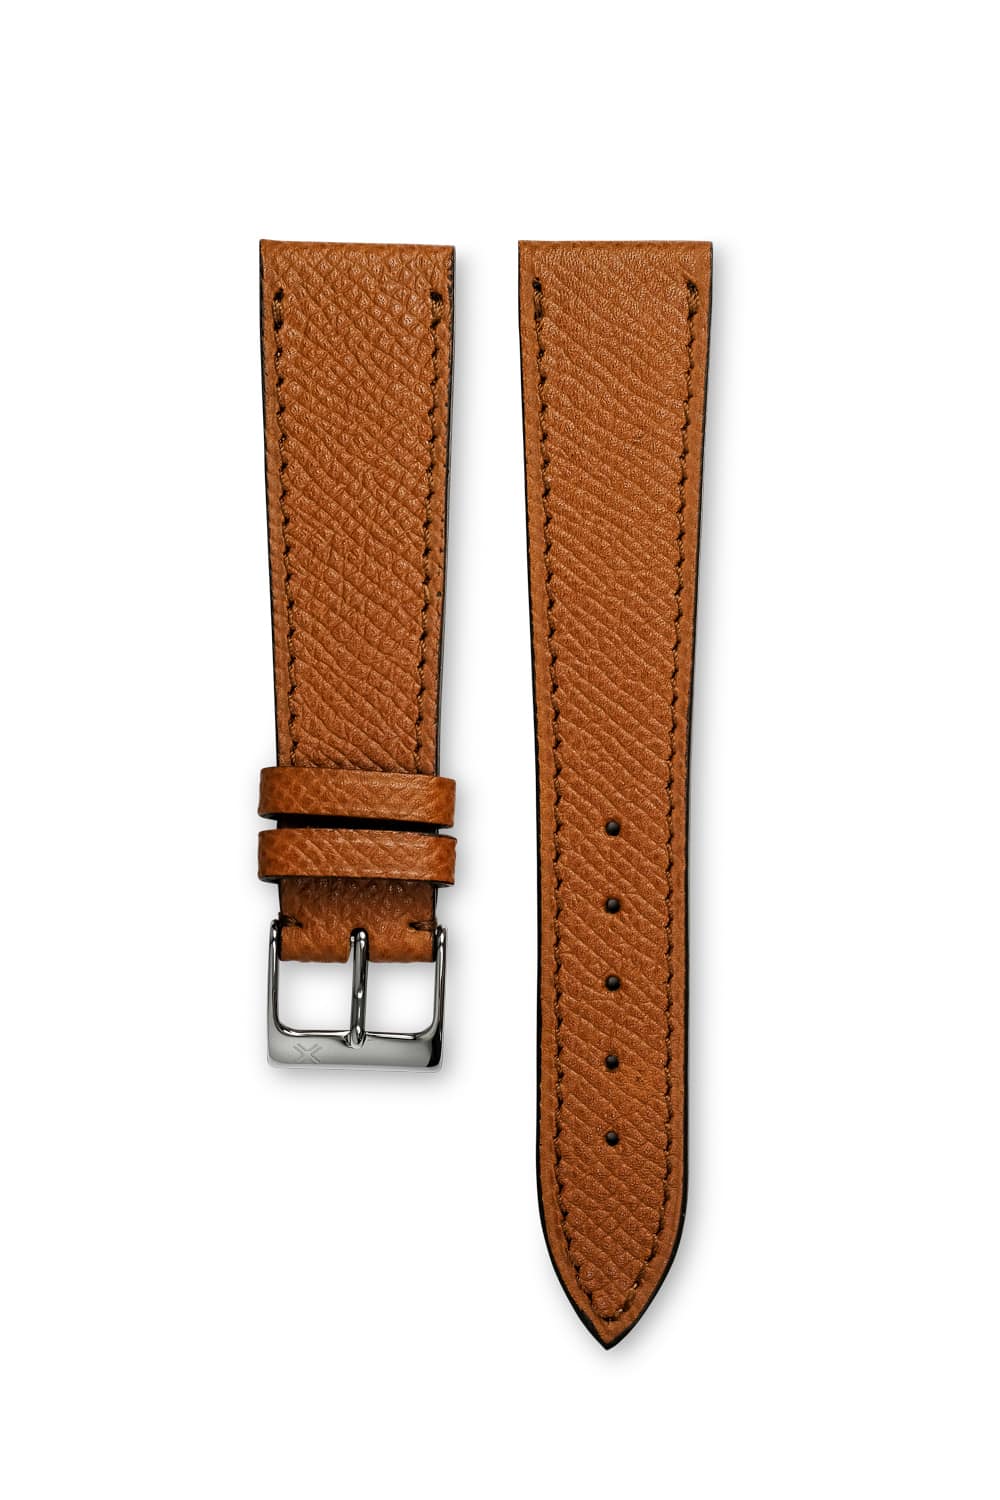 LUGS watch straps GRAINED FRENCH TAN (tone-on-tone)